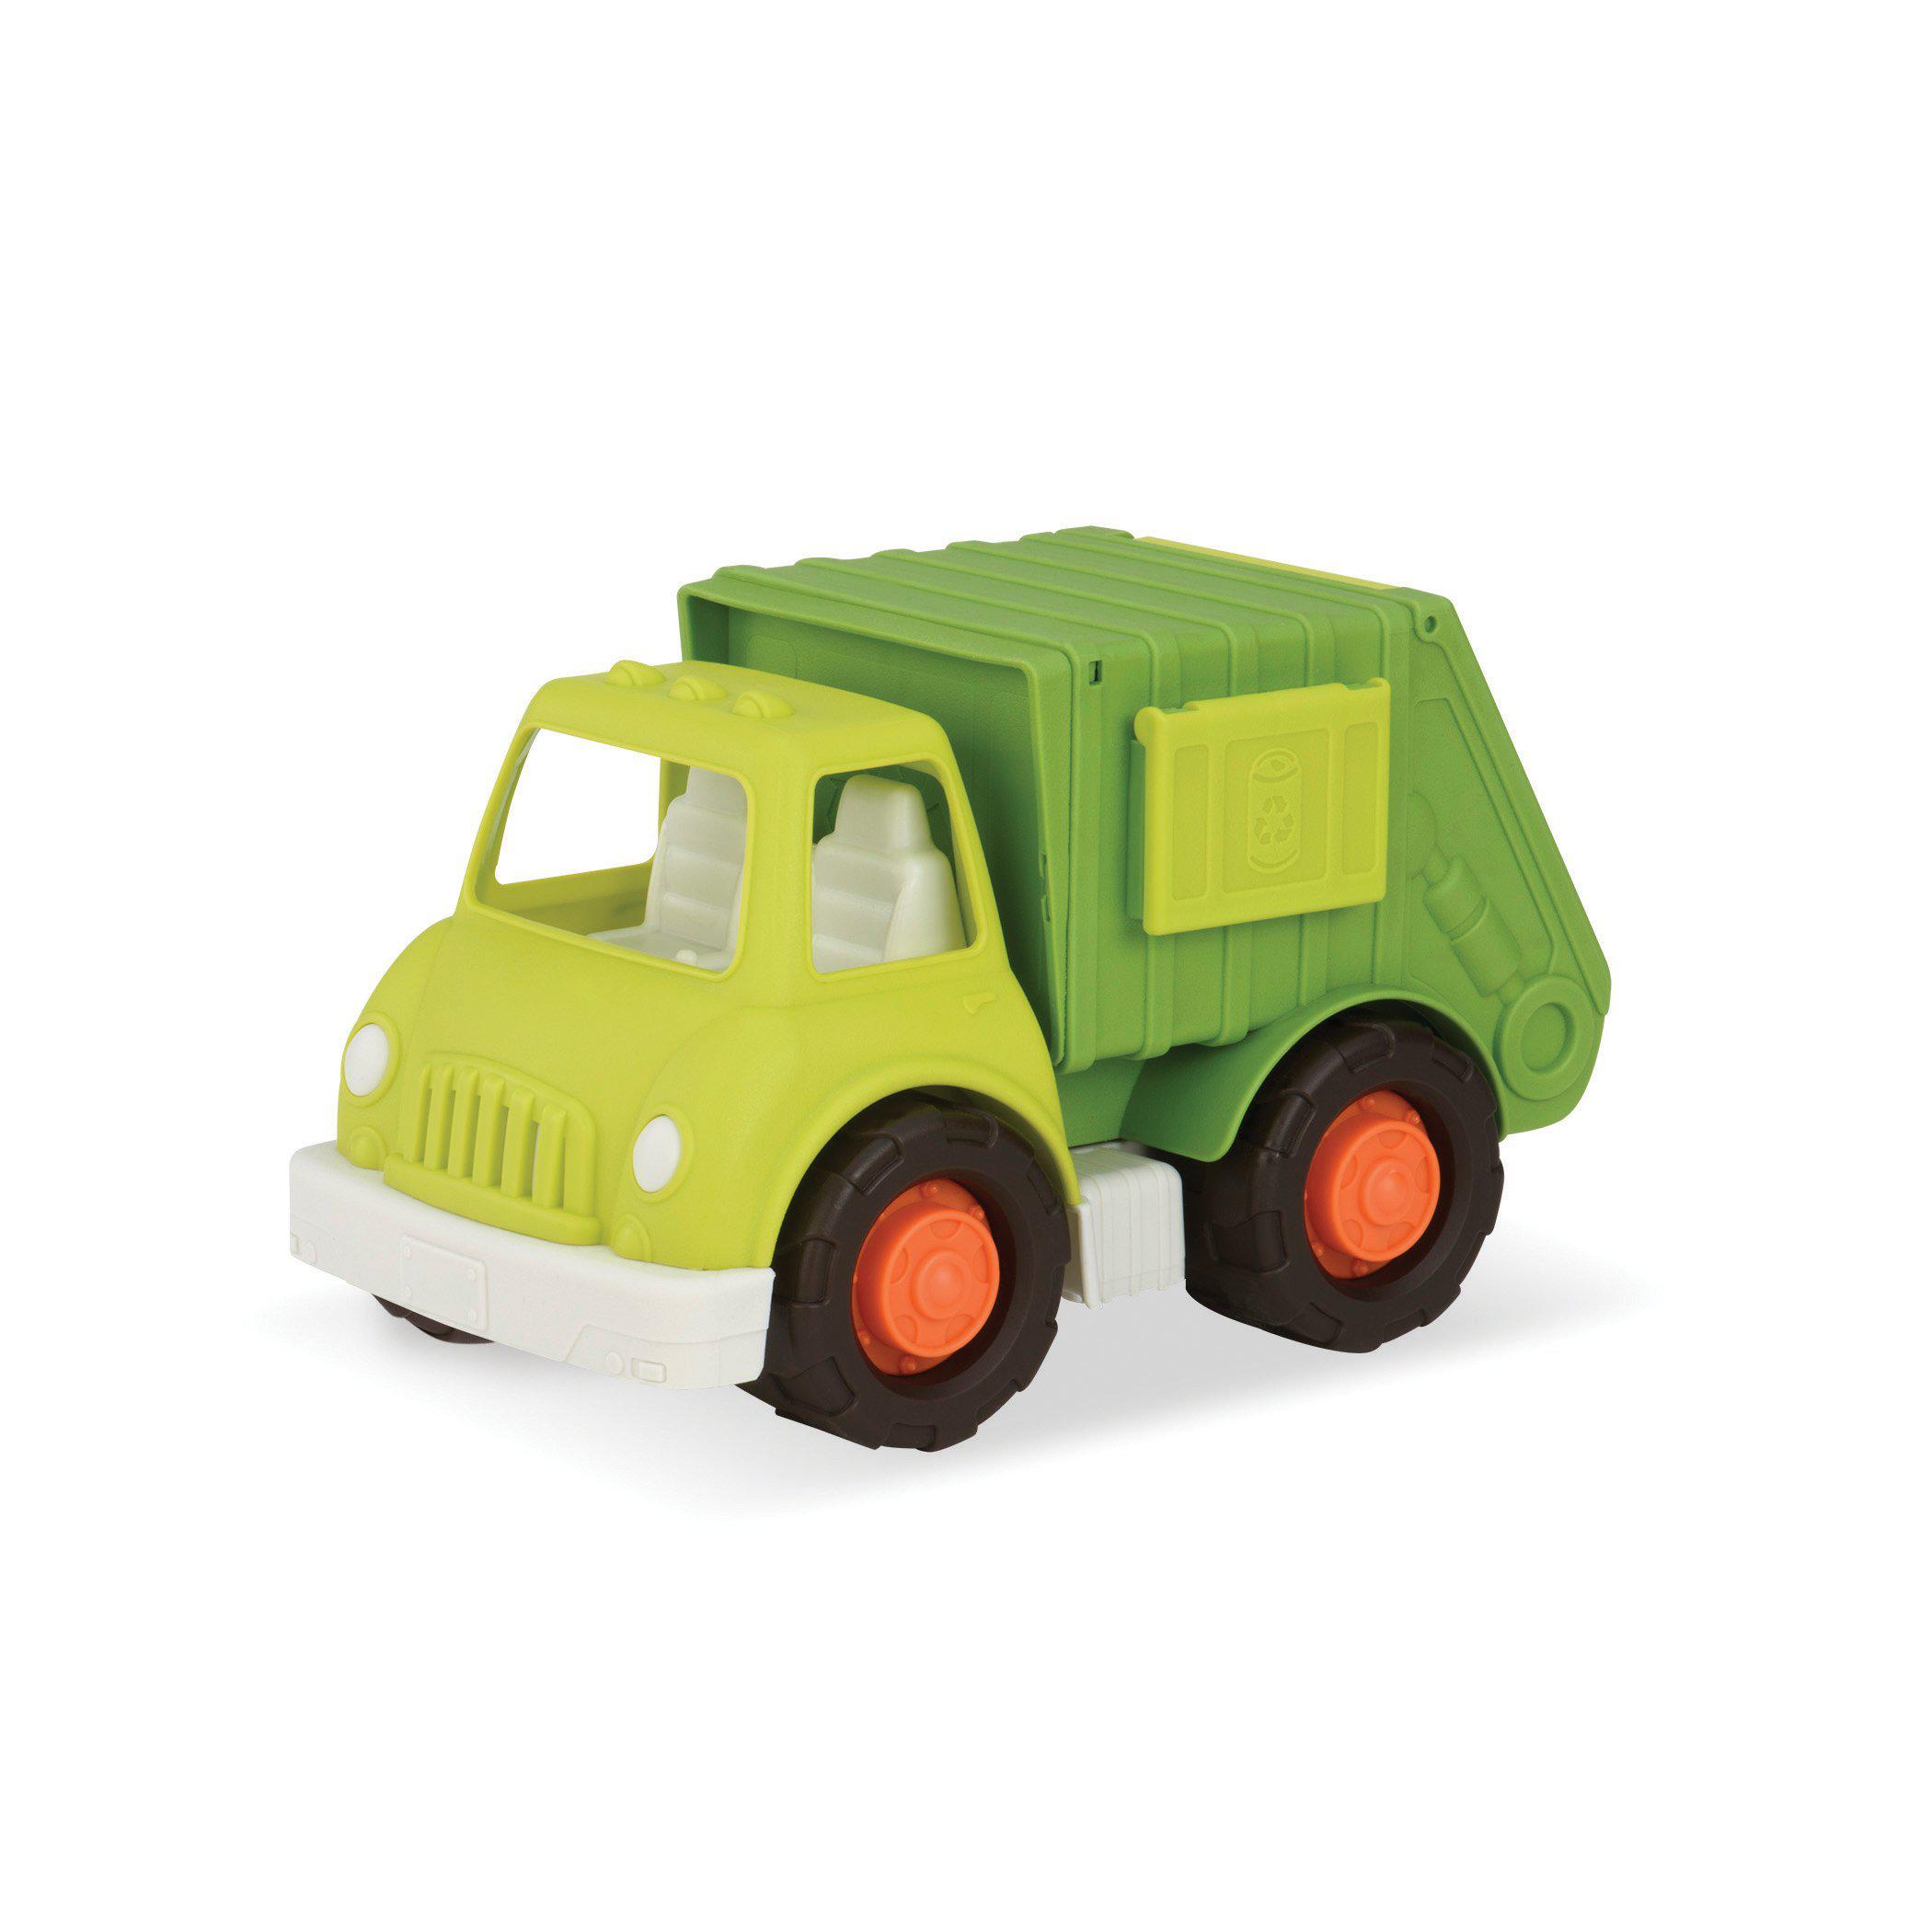 wonder wheels by battat - recycling truck - toy garbage truck - 3 compartments for waste management - toy vehicle for toddler